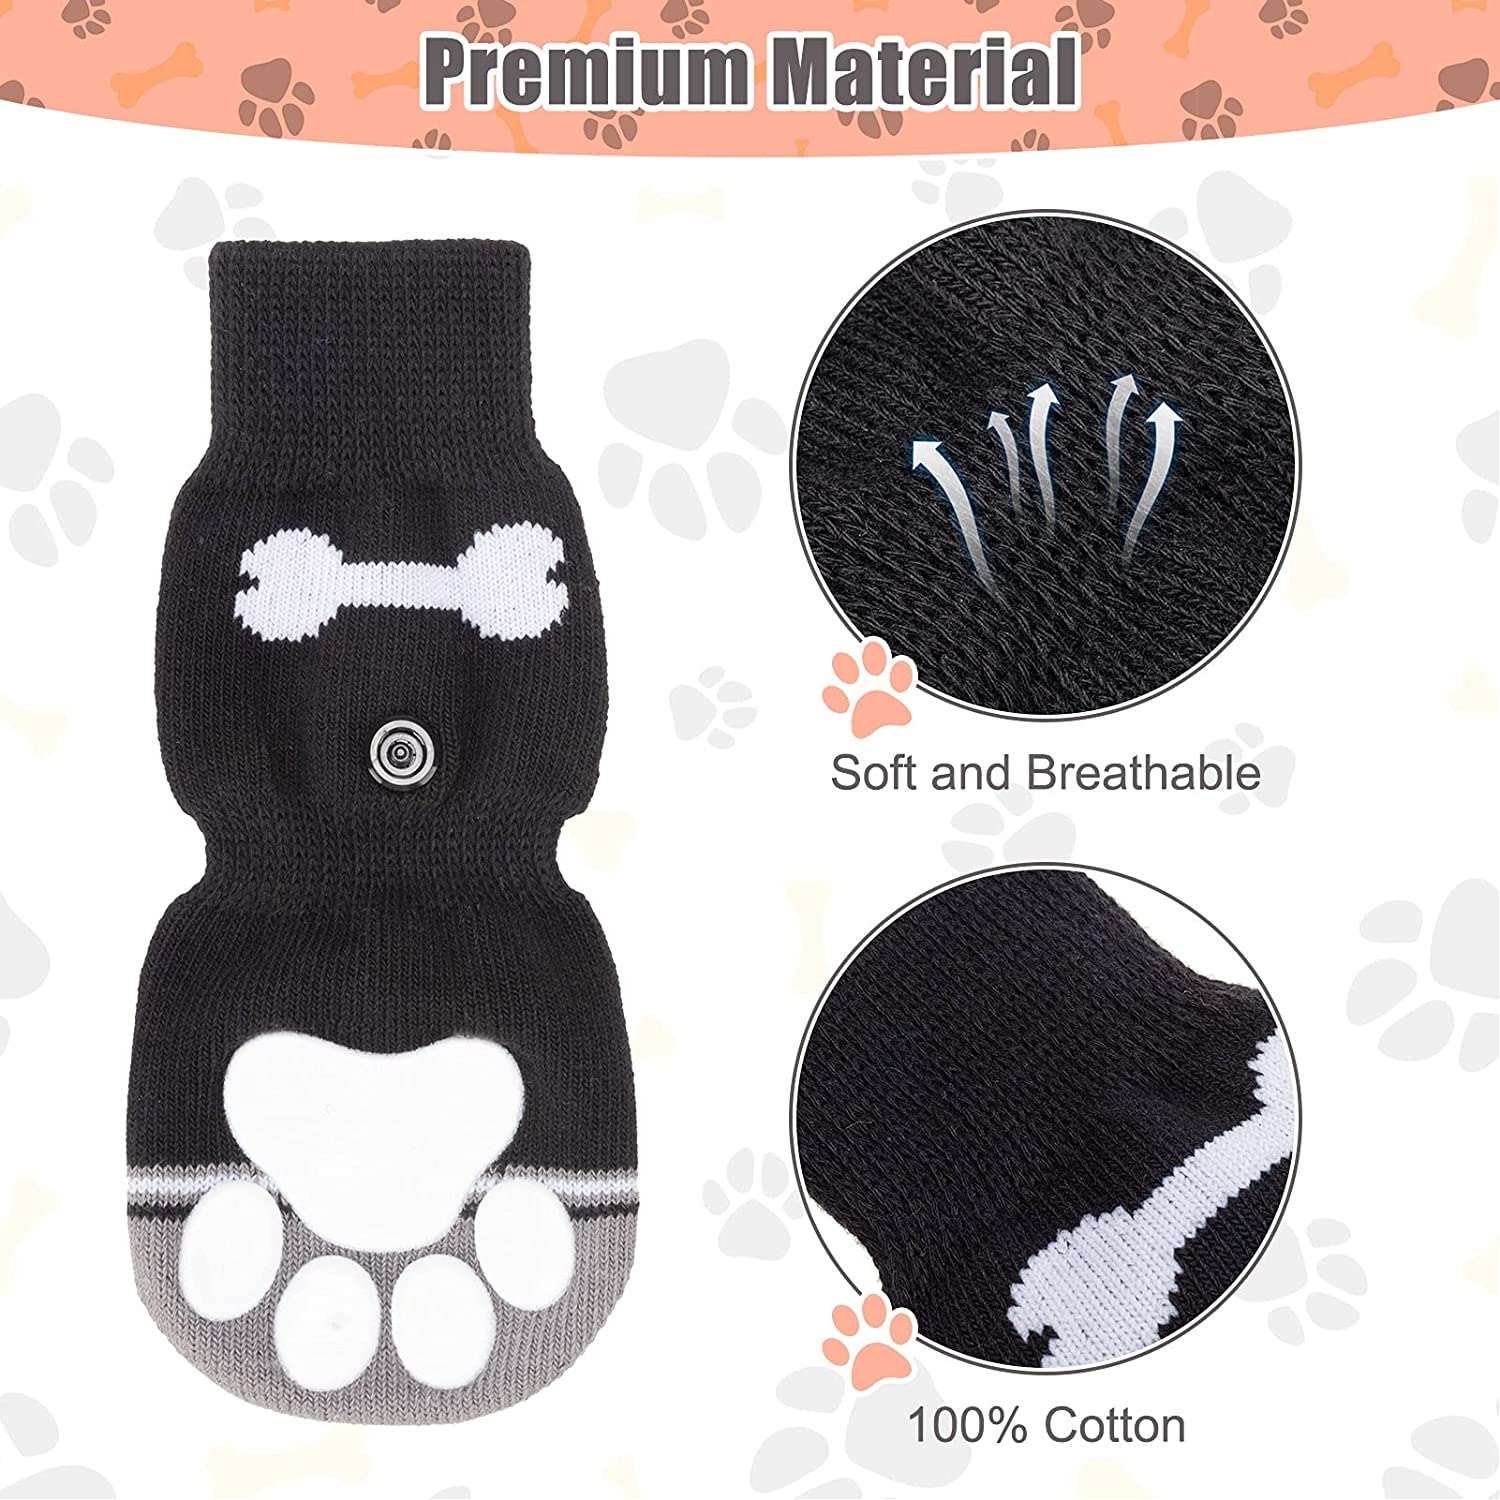 KUTKUT Anti-Skid Knit Socks with Bone Embroidery Pattern for Medium, Large Dogs | Traction Control Non-Slip Pet Paw Protectors with Grips For Big Dogs, Better Control on Hardwood Floor Paw Pr